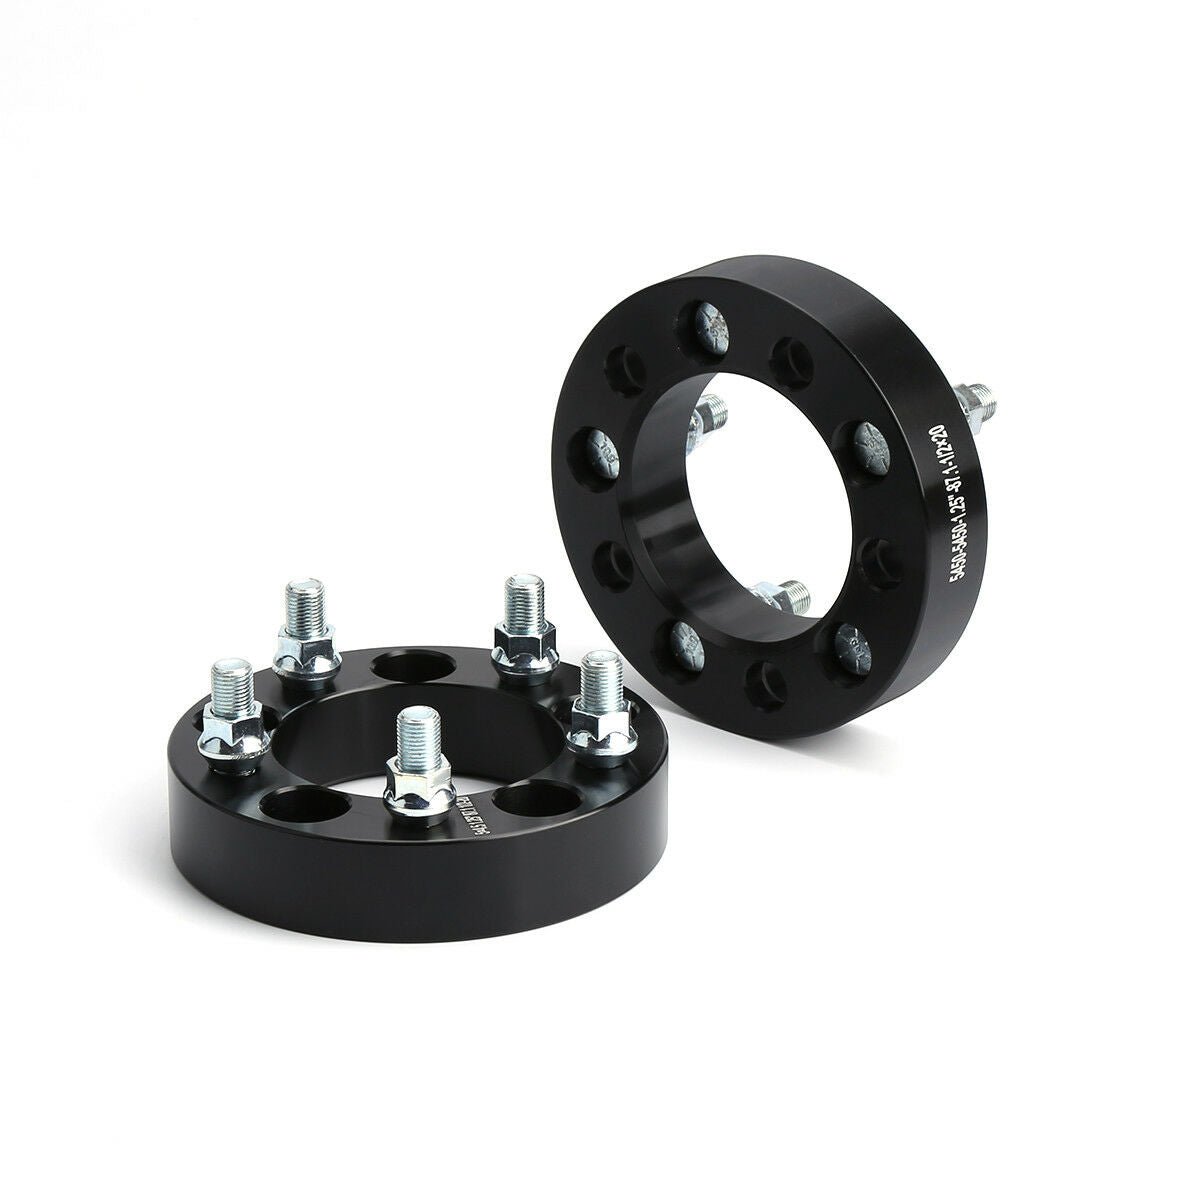 5x4.5 Forged 1 inch Wheel Spacer for 1984-2001 Jeep Cherokee 2005-2014 Mustang xccscss.